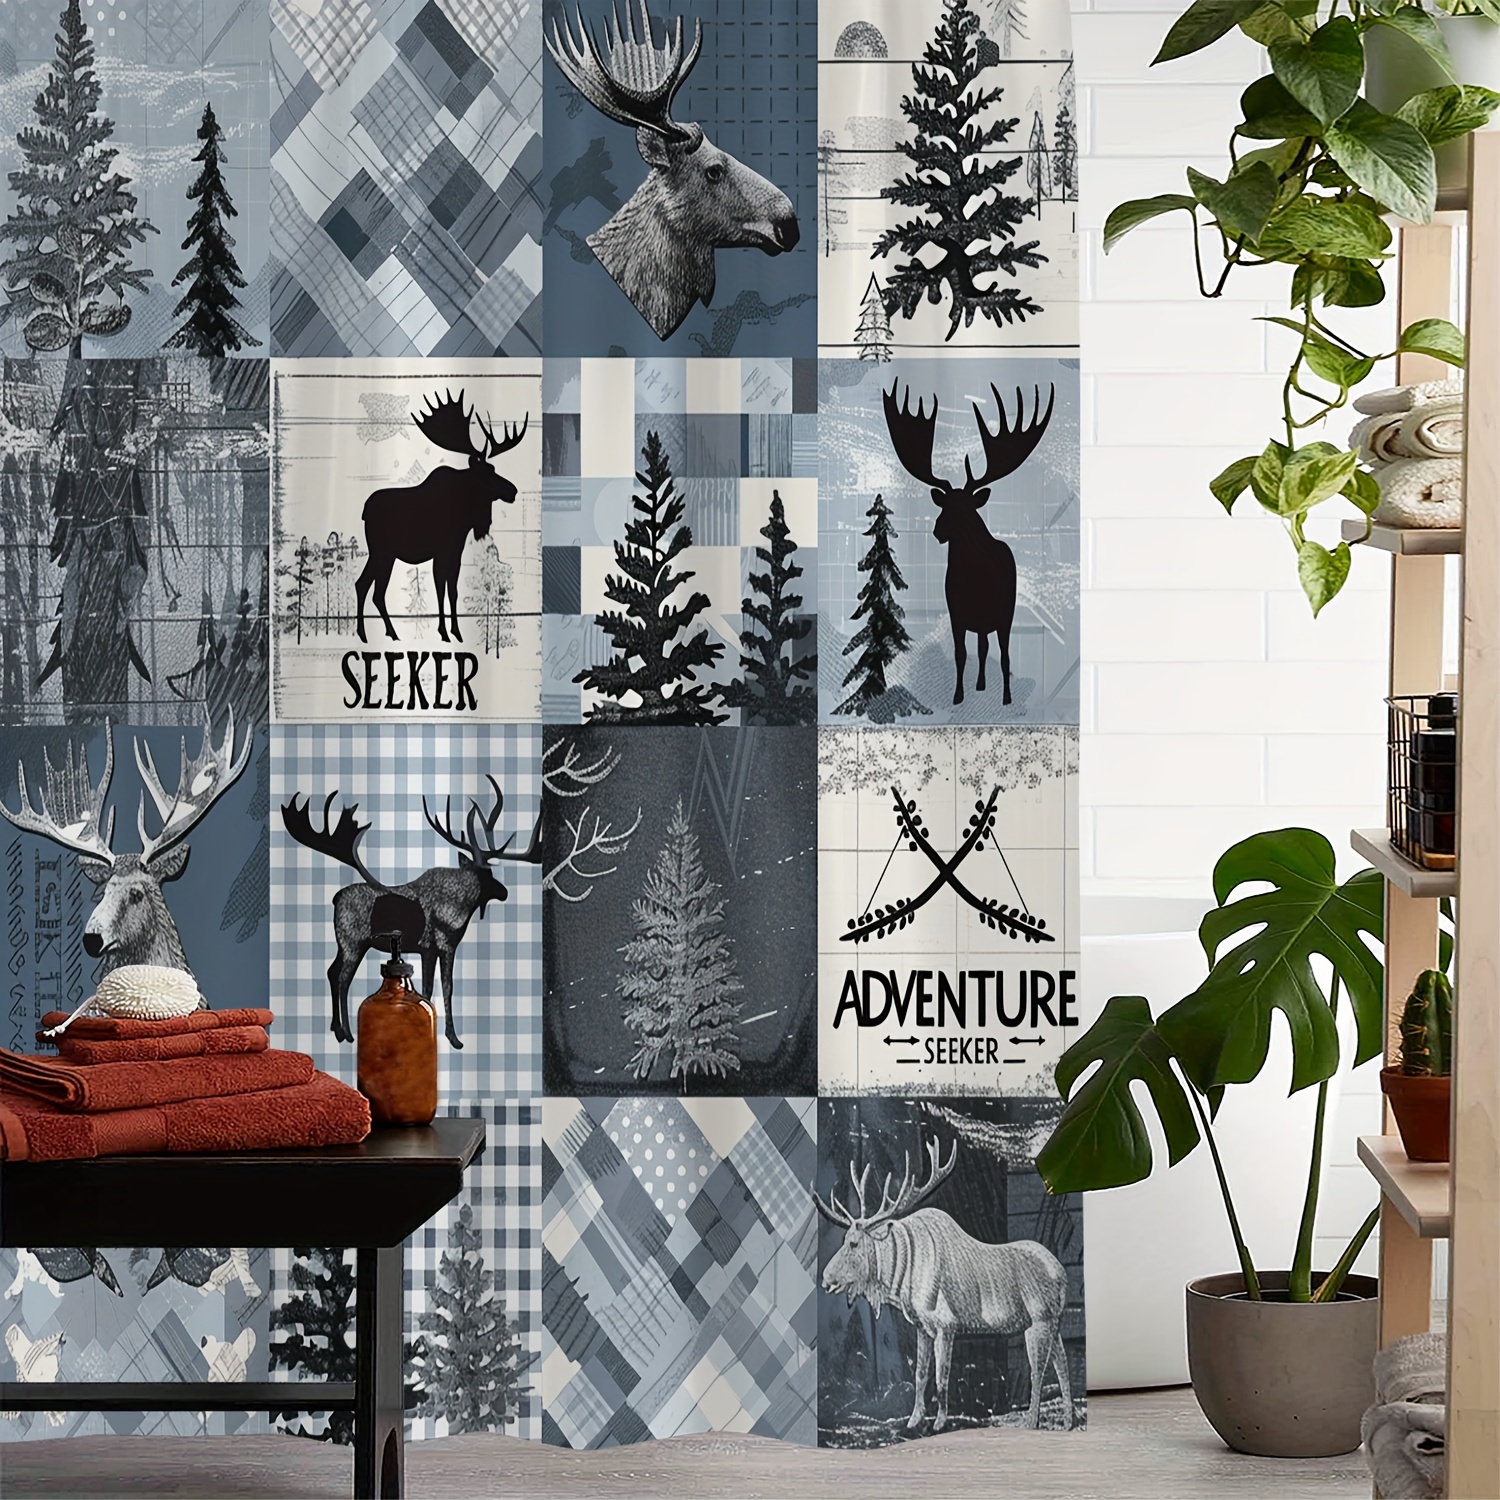 

Water-resistant Polyester Shower Curtain With Moose And Tree Print, Woven Arts Pattern, Includes 12 Hooks - Machine Washable Animal Themed Curtain For Bathroom And Windows